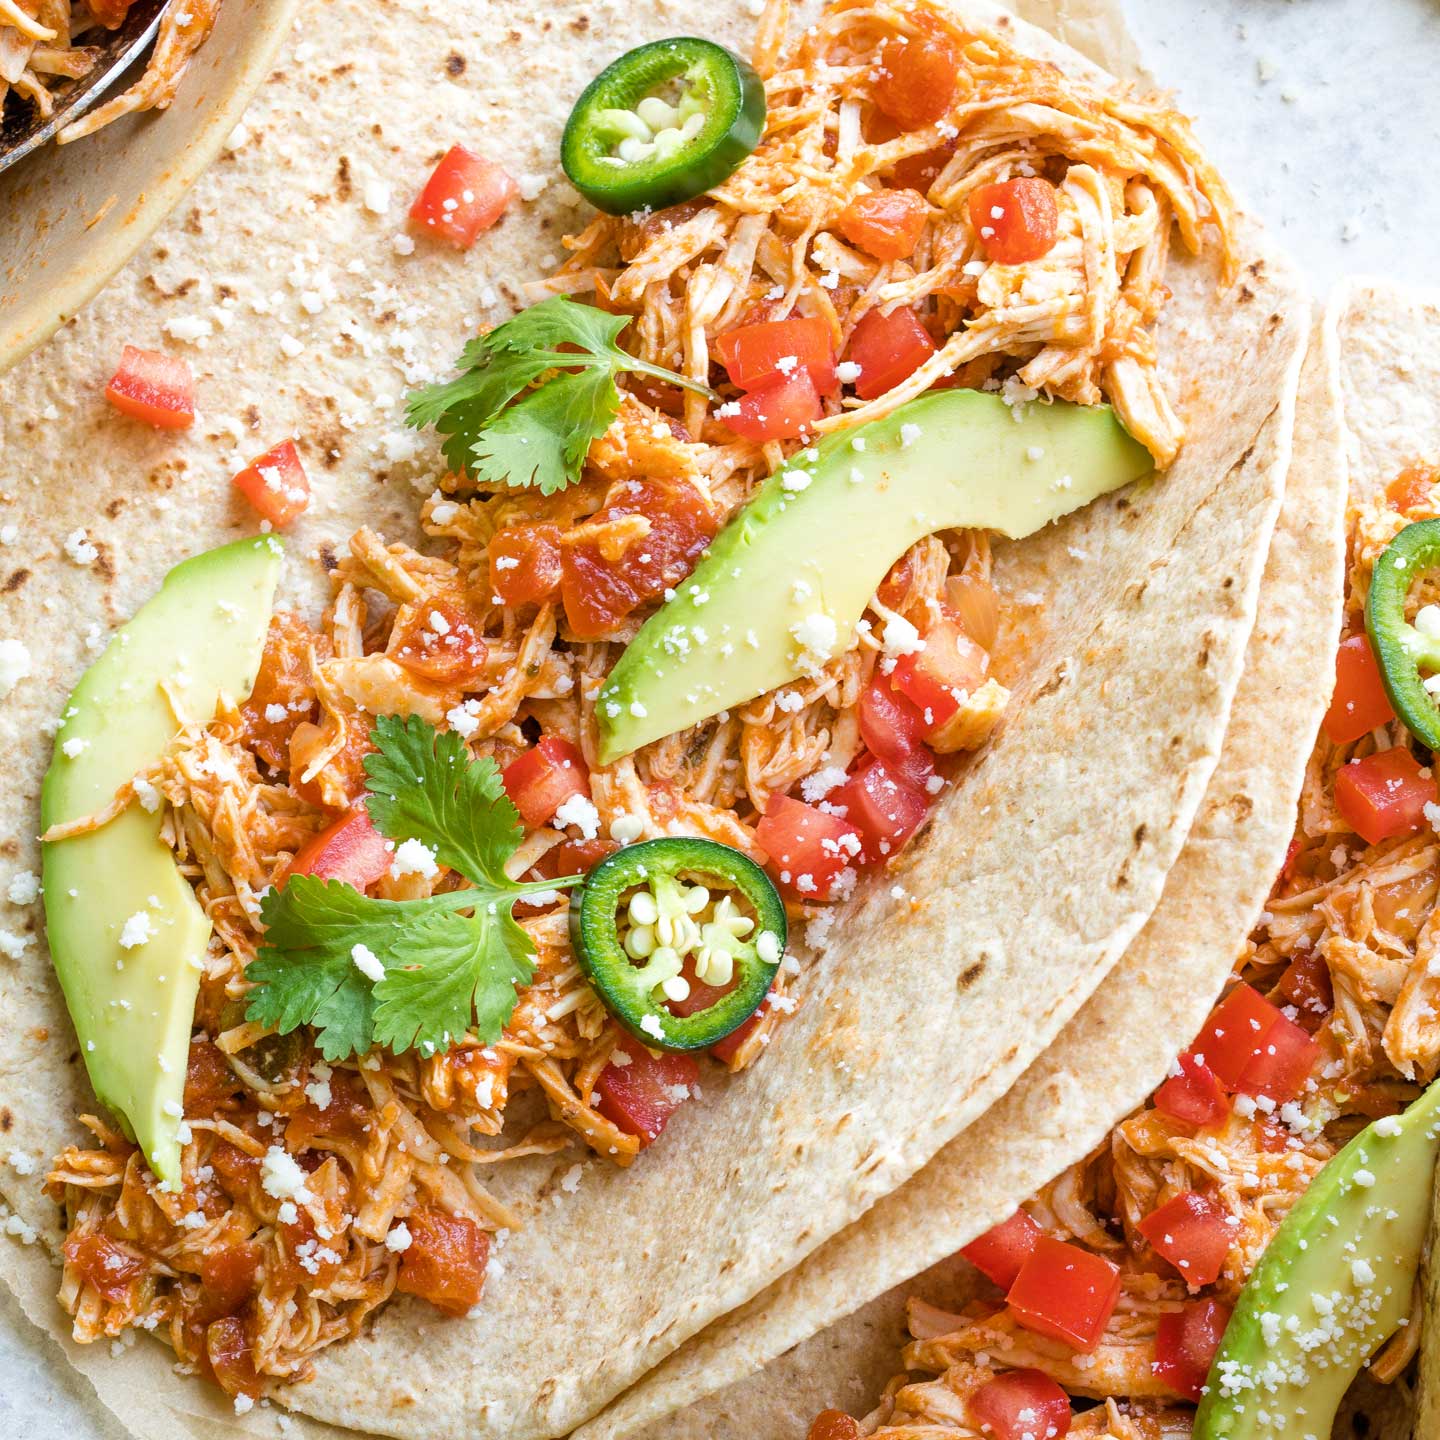 Spicy version of the chicken tacos sopped with avocado and jalapenos.